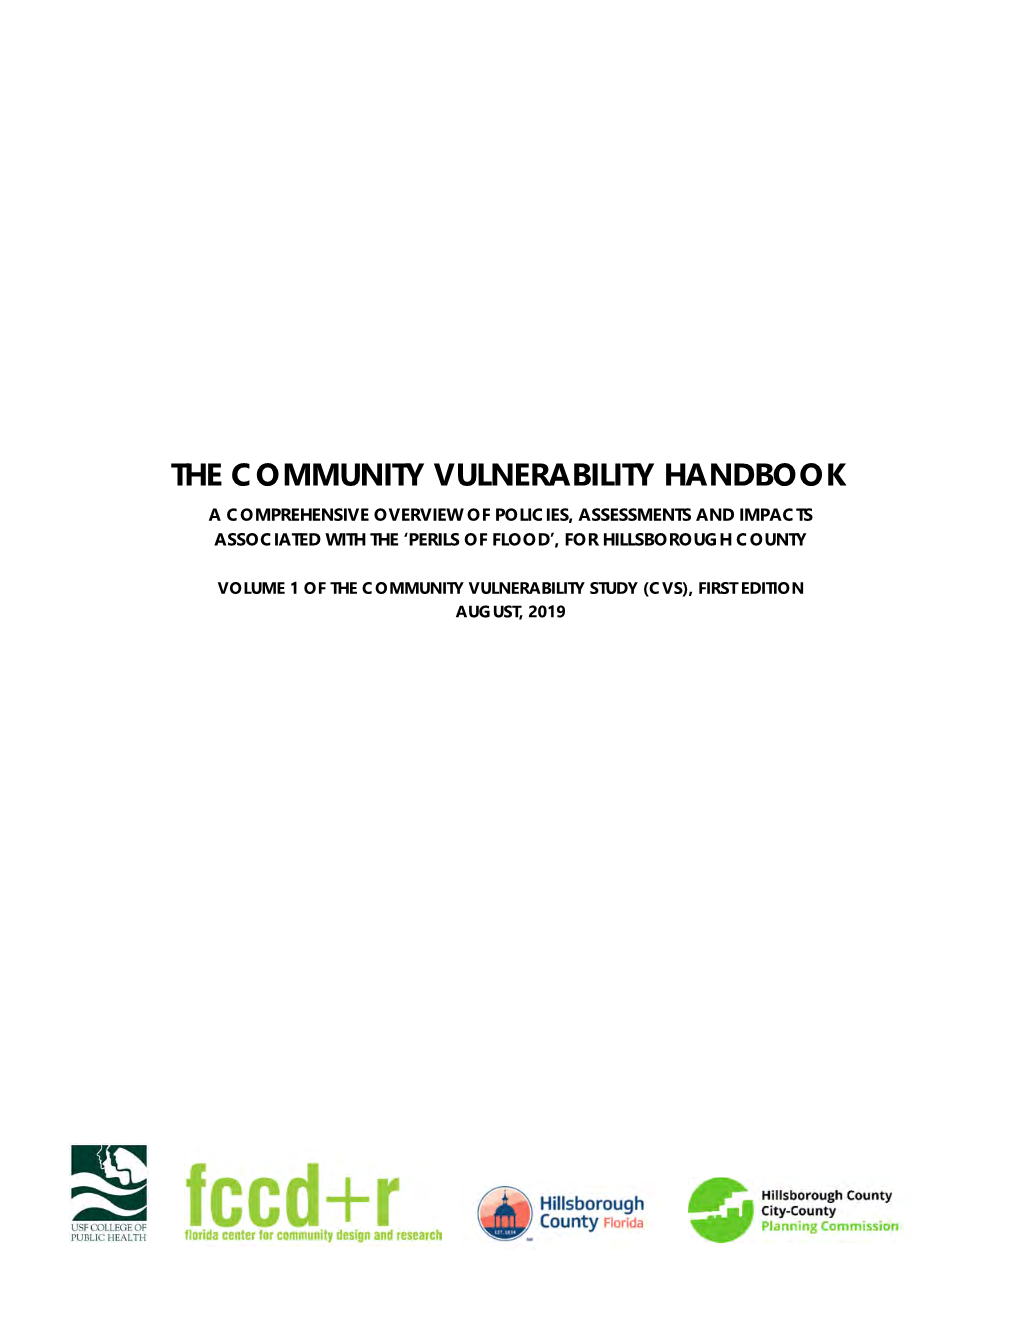 The Community Vulnerability Handbook a Comprehensive Overview of Policies, Assessments and Impacts Associated with the ‘Perils of Flood’, for Hillsborough County